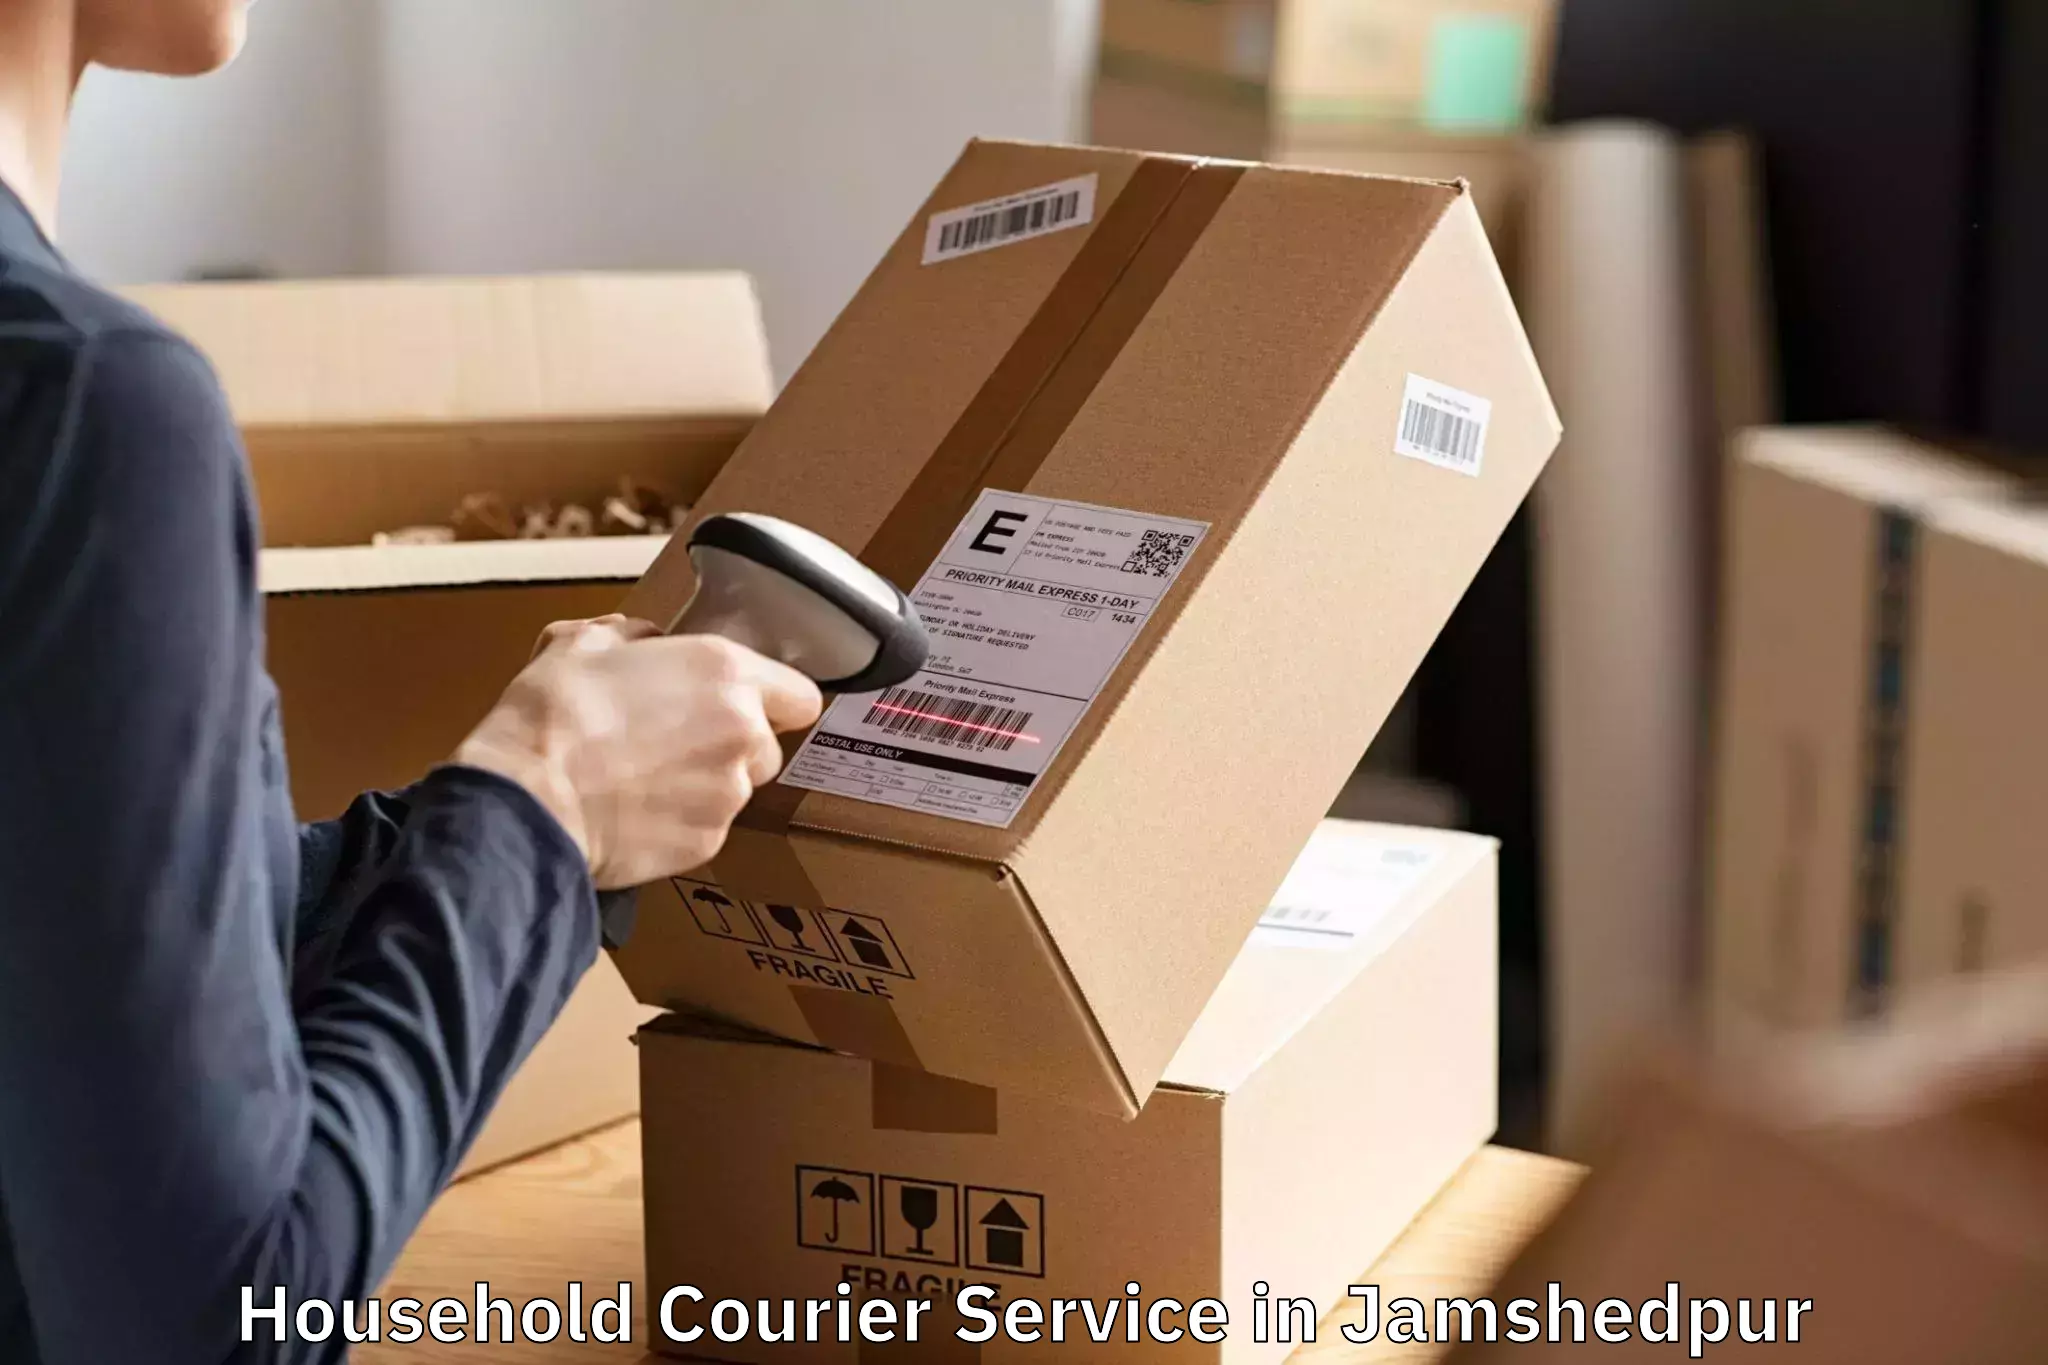 Trusted Household Courier Service in Jamshedpur, Jharkhand (JH)